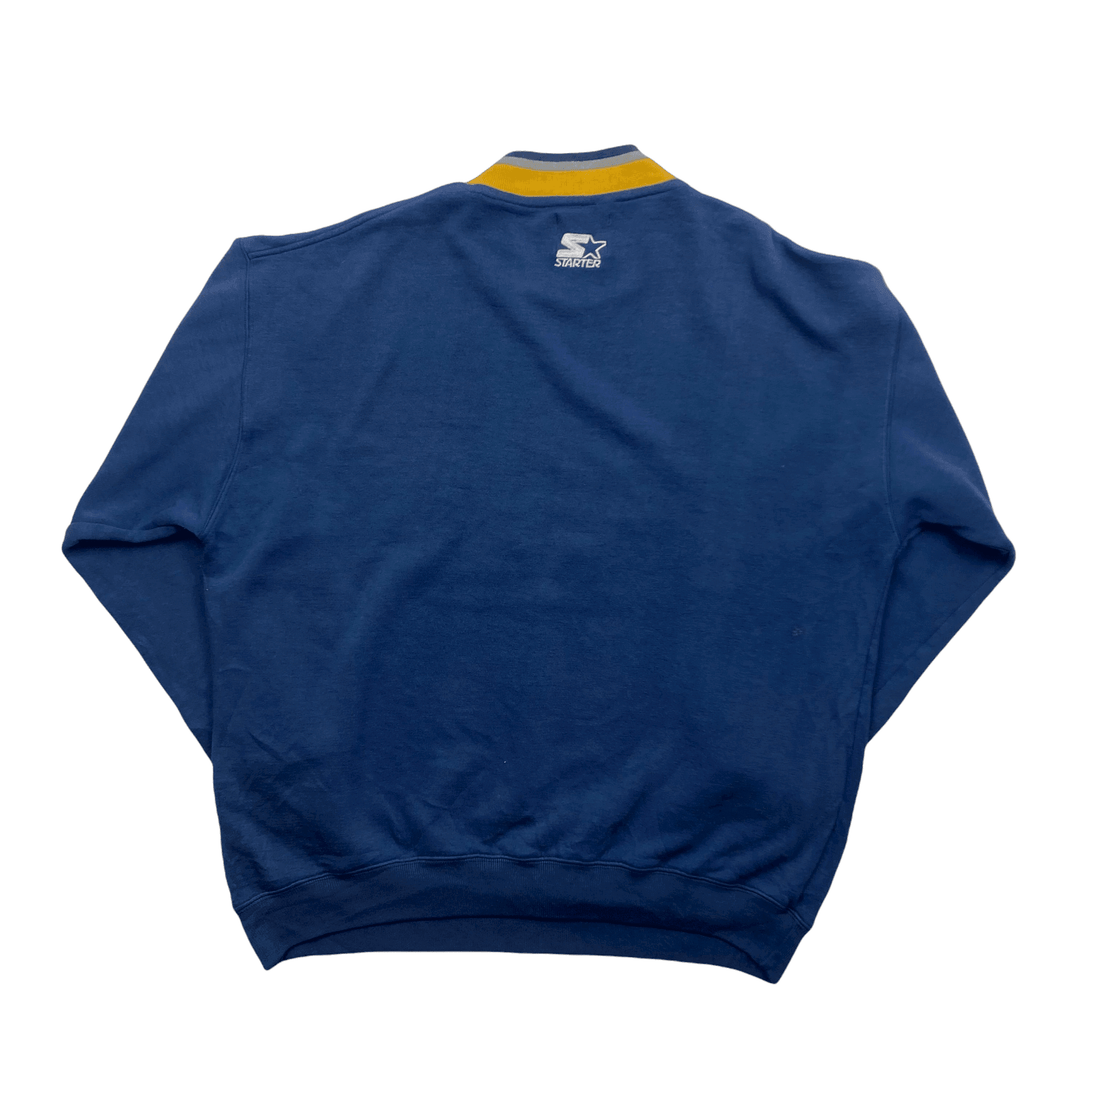 Vintage 90s Blue + Yellow Starter University of Michigan USA Spell-Out Sweatshirt - Extra Large - The Streetwear Studio